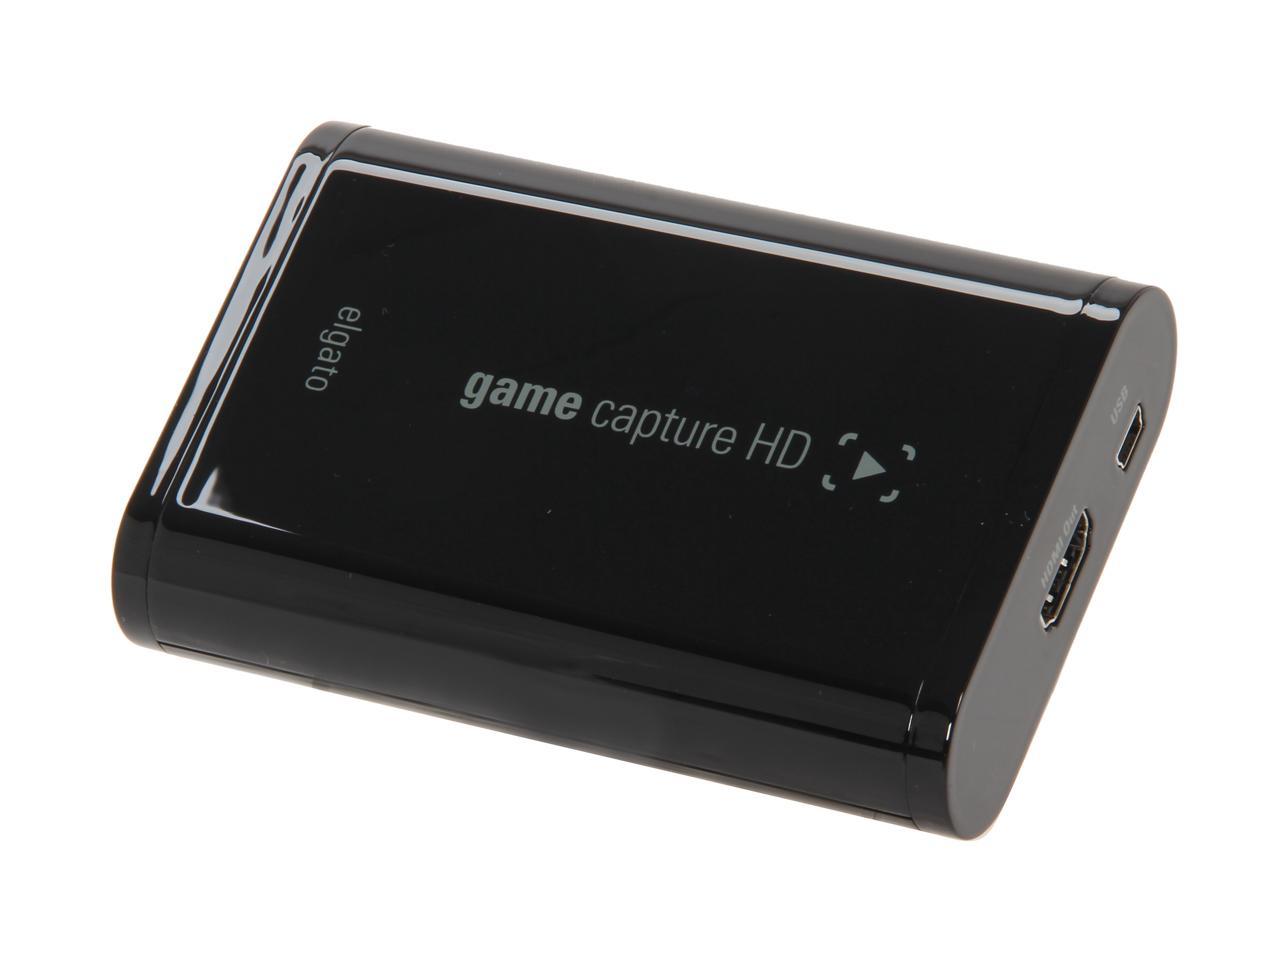 Elgato Game Capture Hd Xbox And Playstation High Definition Game Recorder For Mac And Pc Full